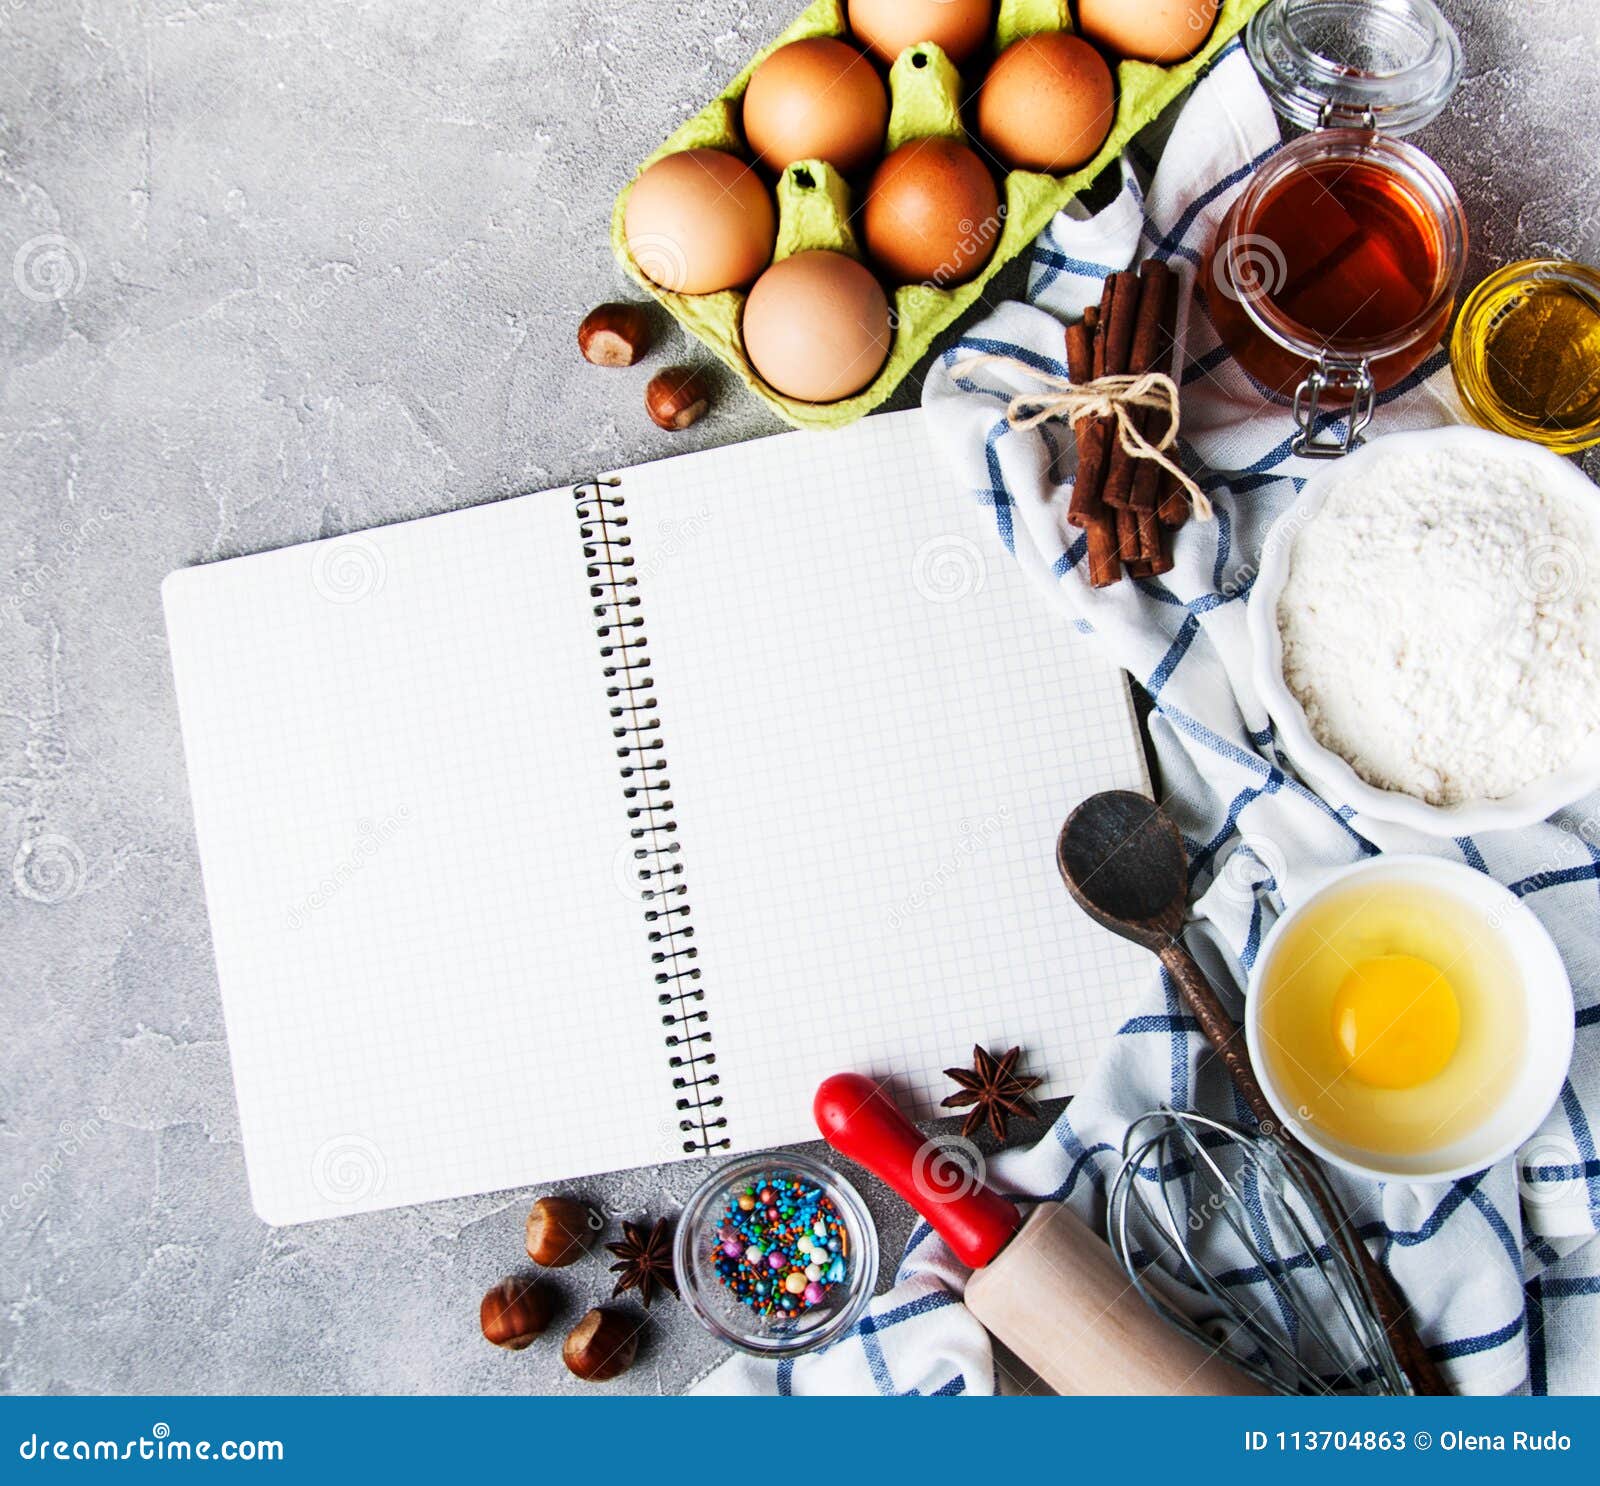 Recipe Concept - Notebook and Ingredients Stock Image - Image of ...